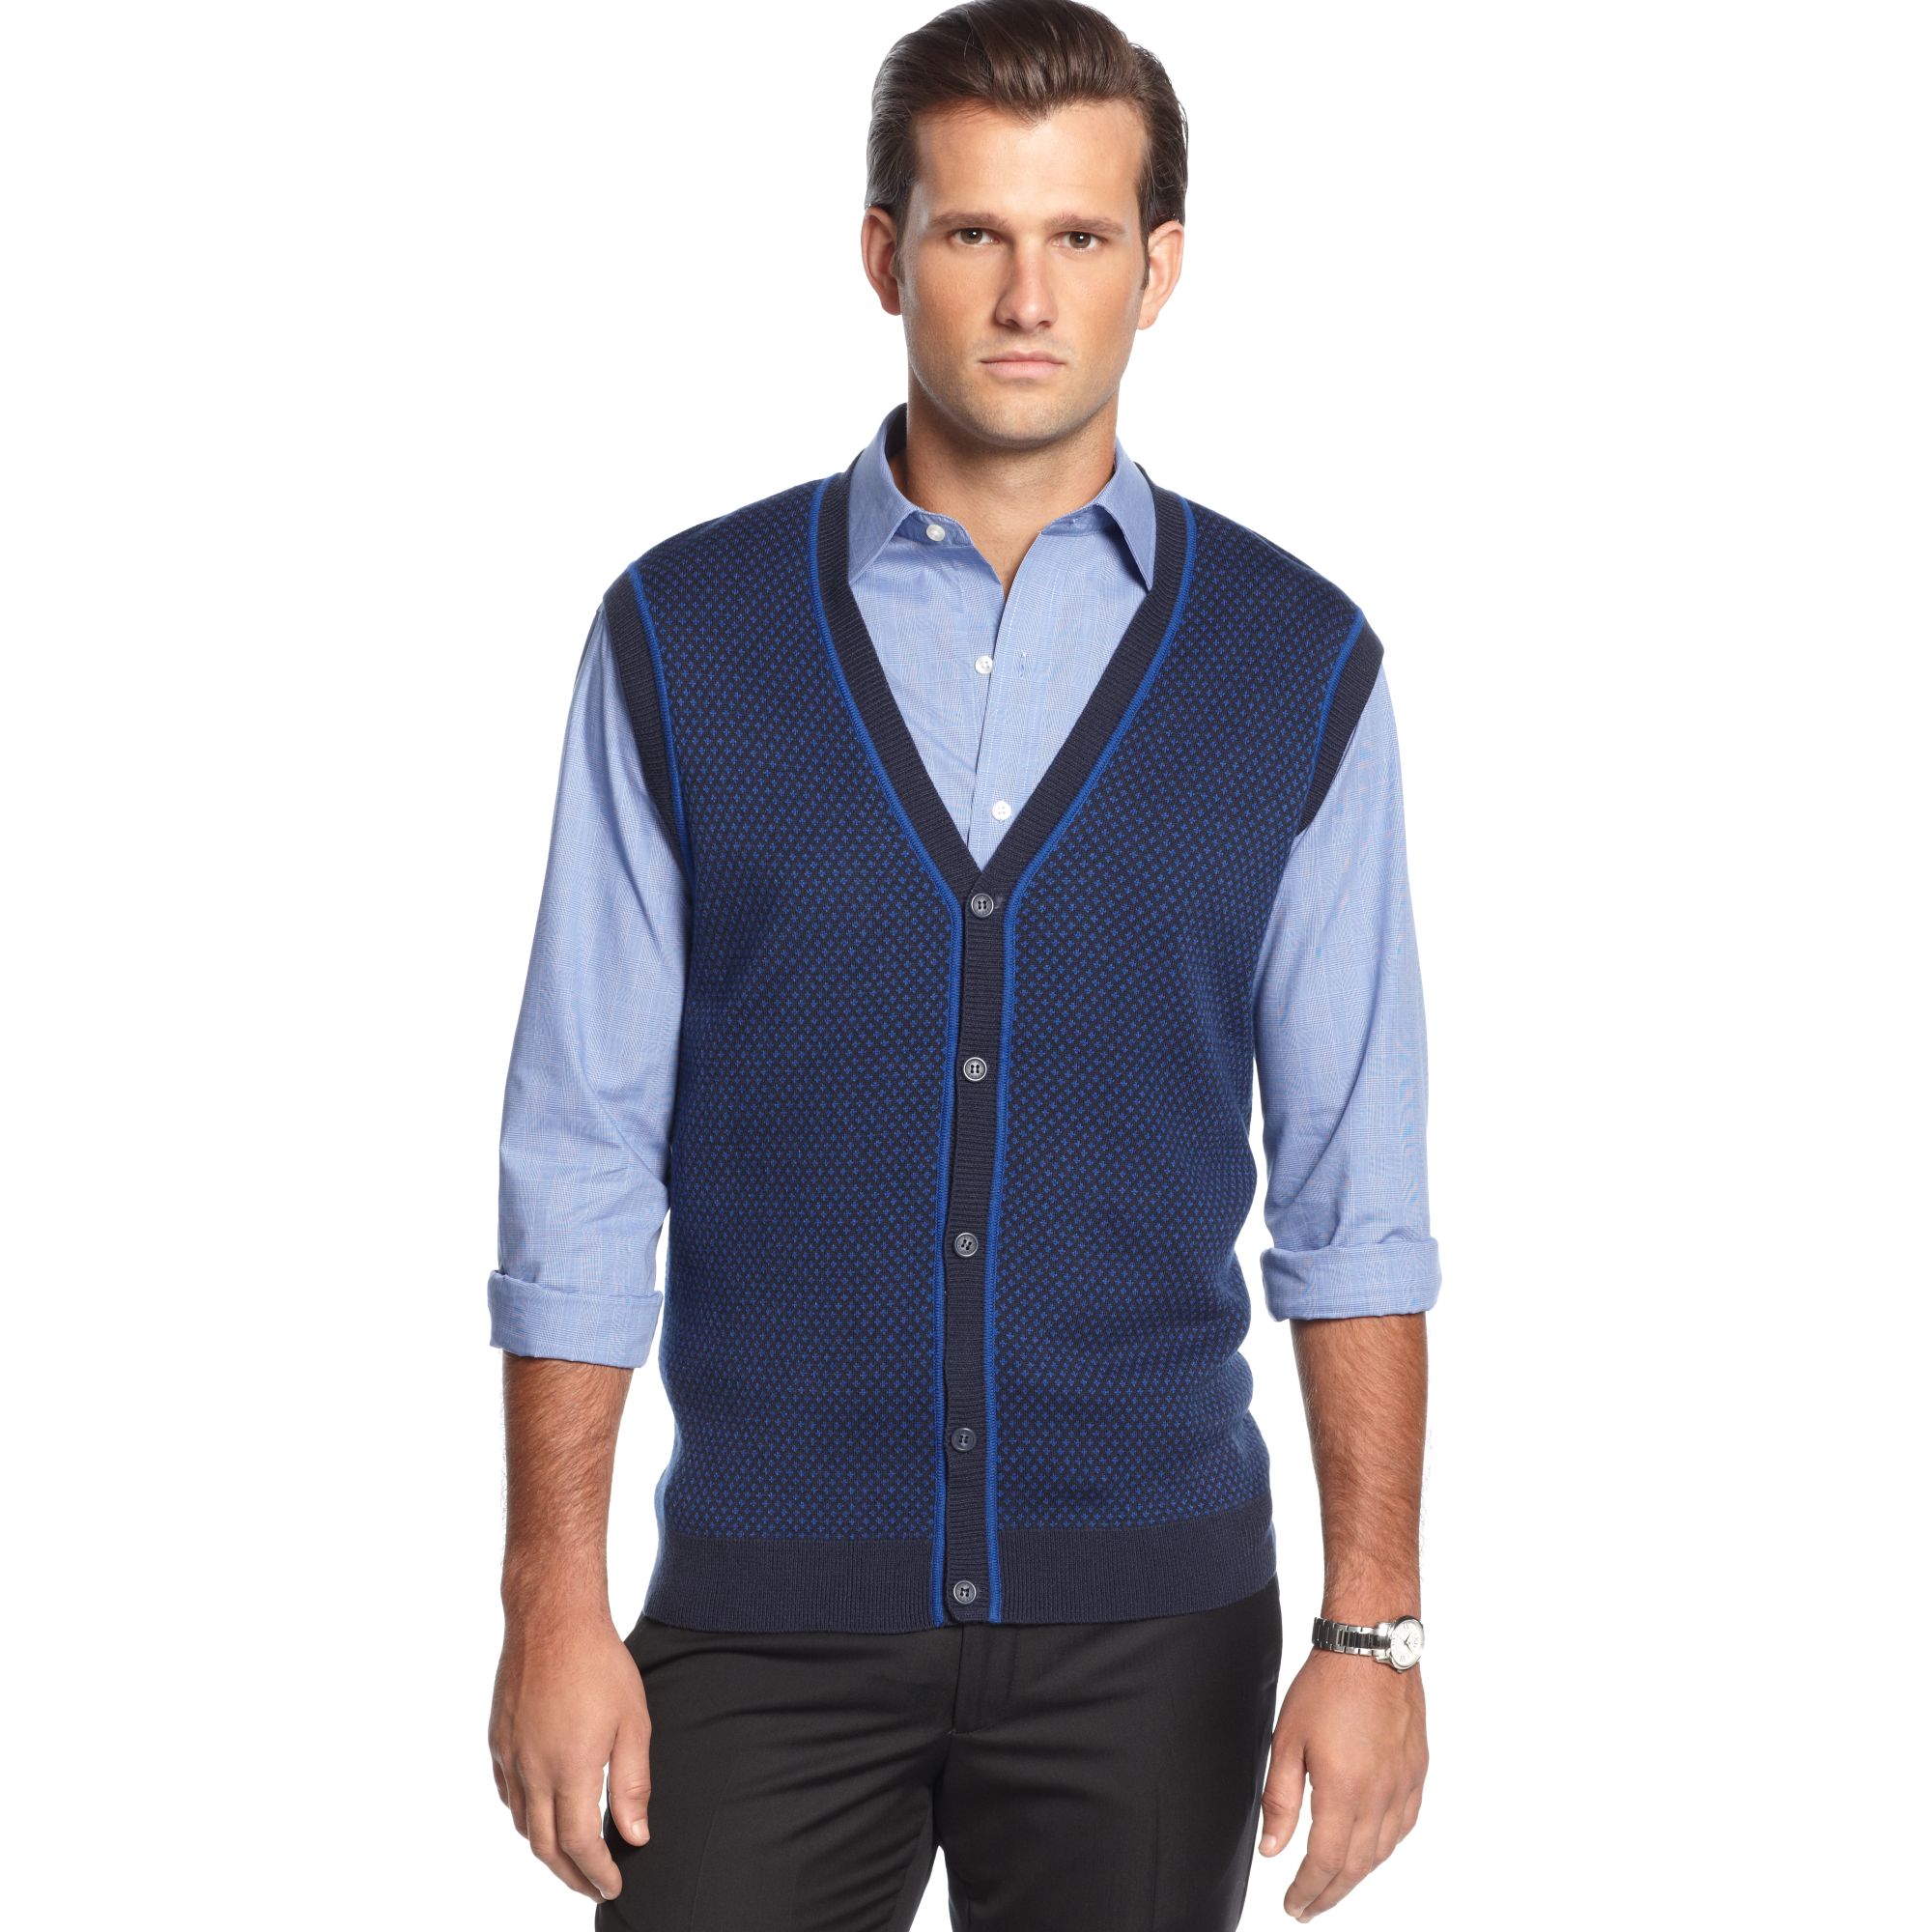 Button Sweater Vests For Men - Gray Cardigan Sweater